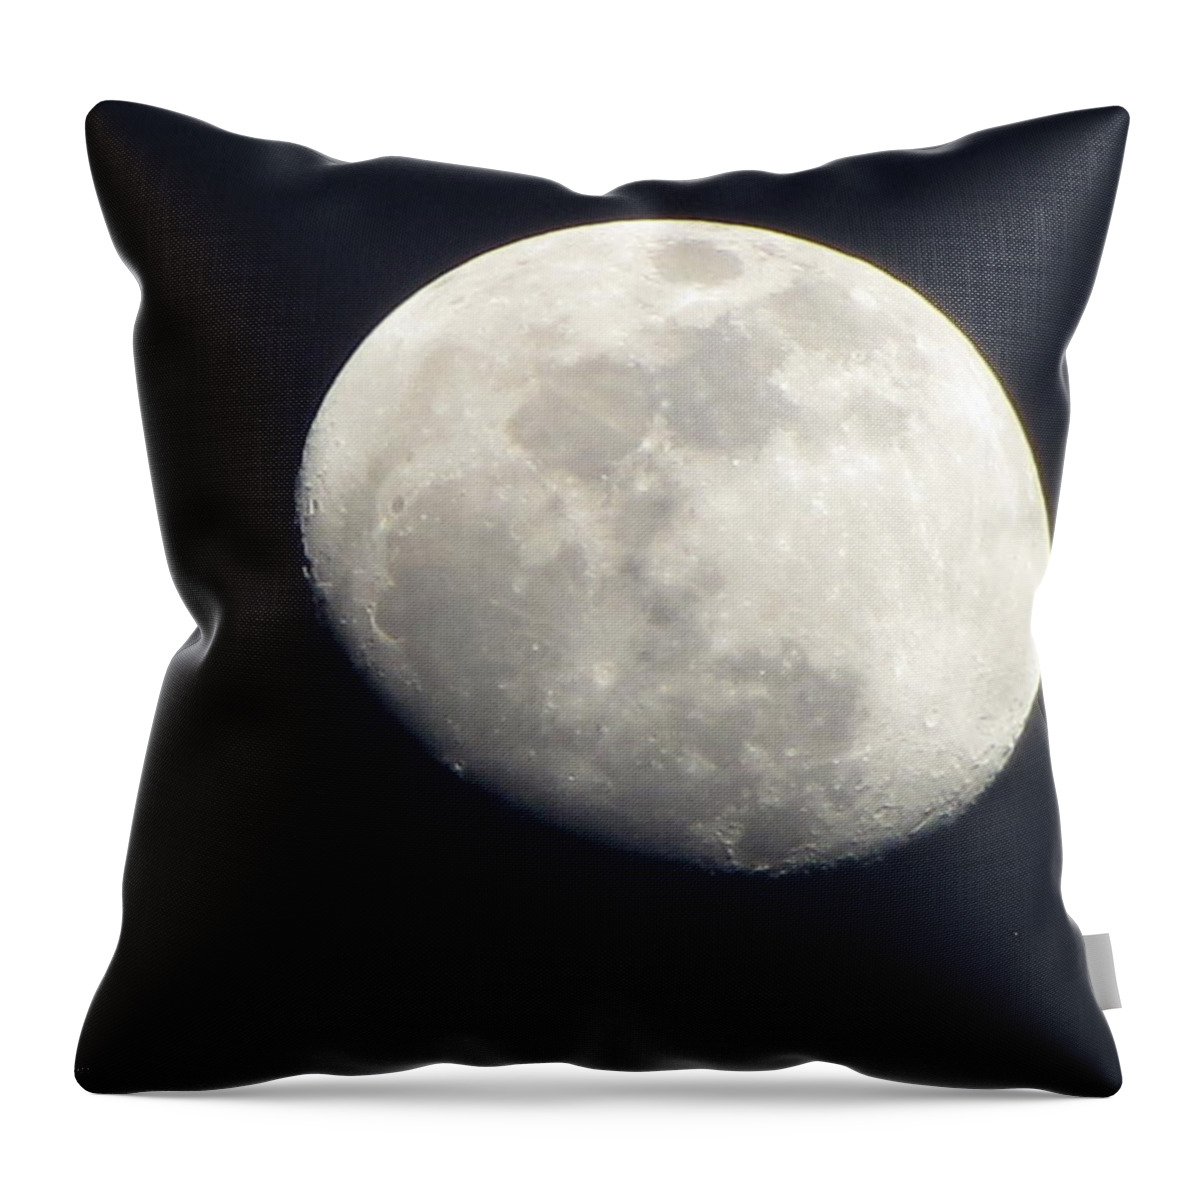 Moon Throw Pillow featuring the photograph Moon 022113 by Joyce Dickens